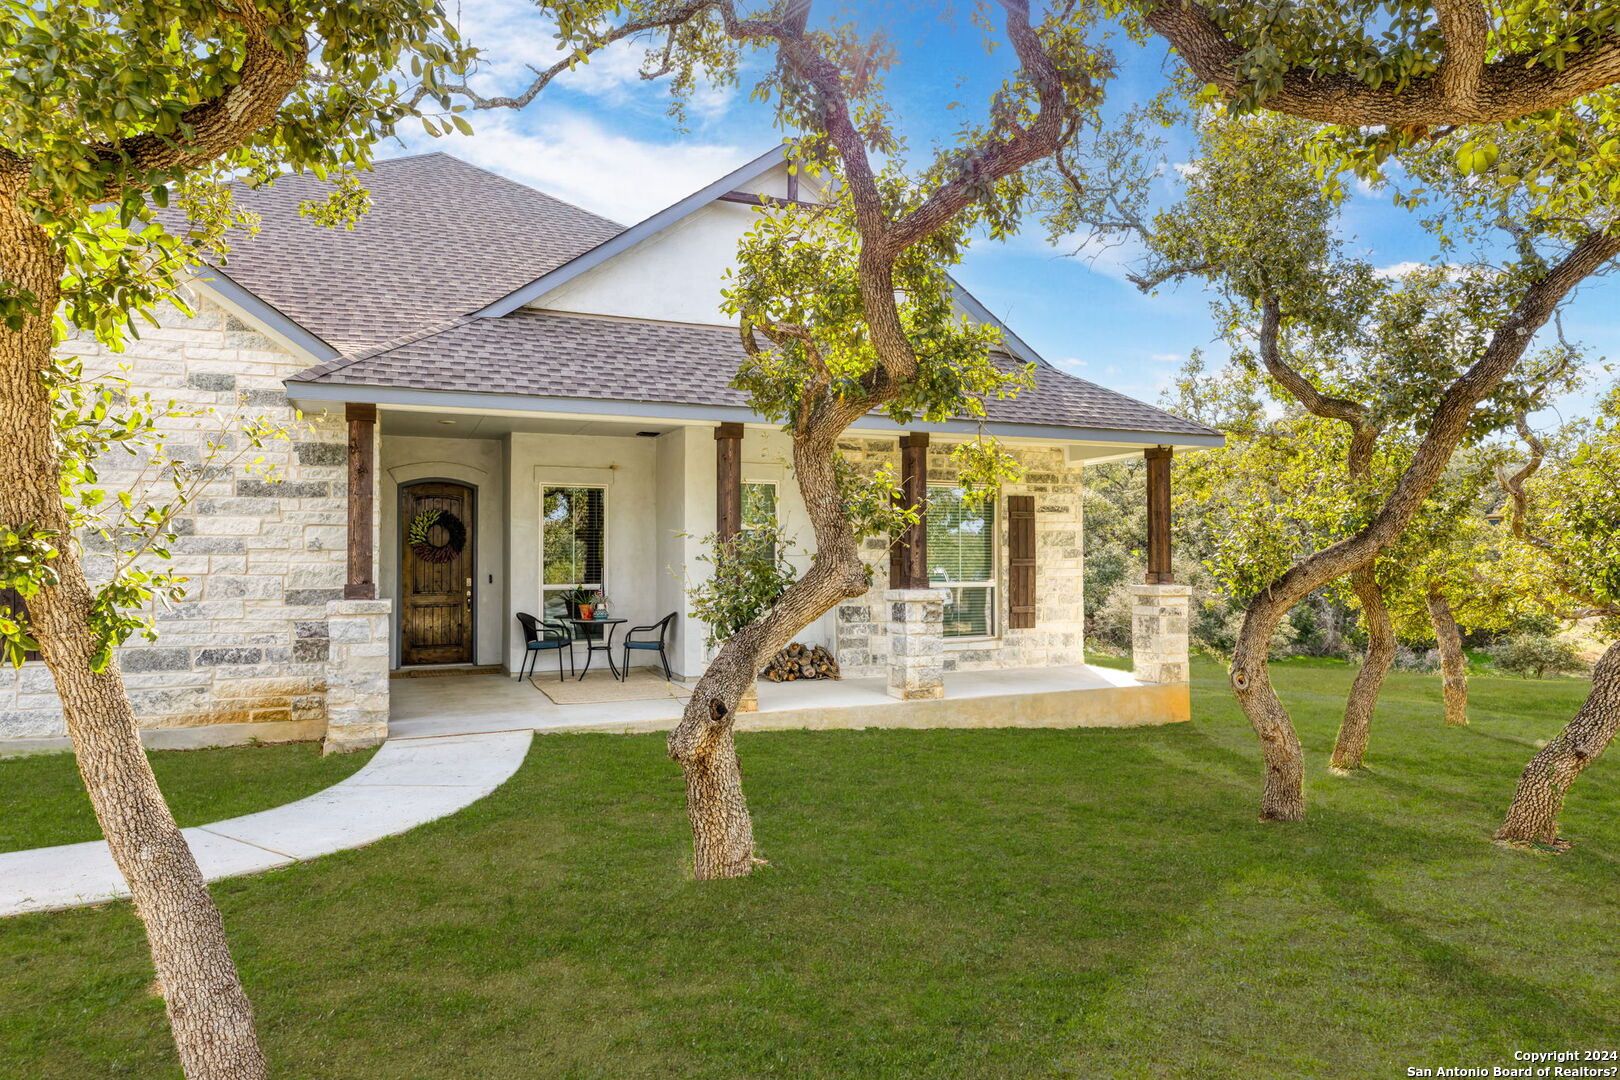 Photo of 155 Collanade Dr in New Braunfels, TX